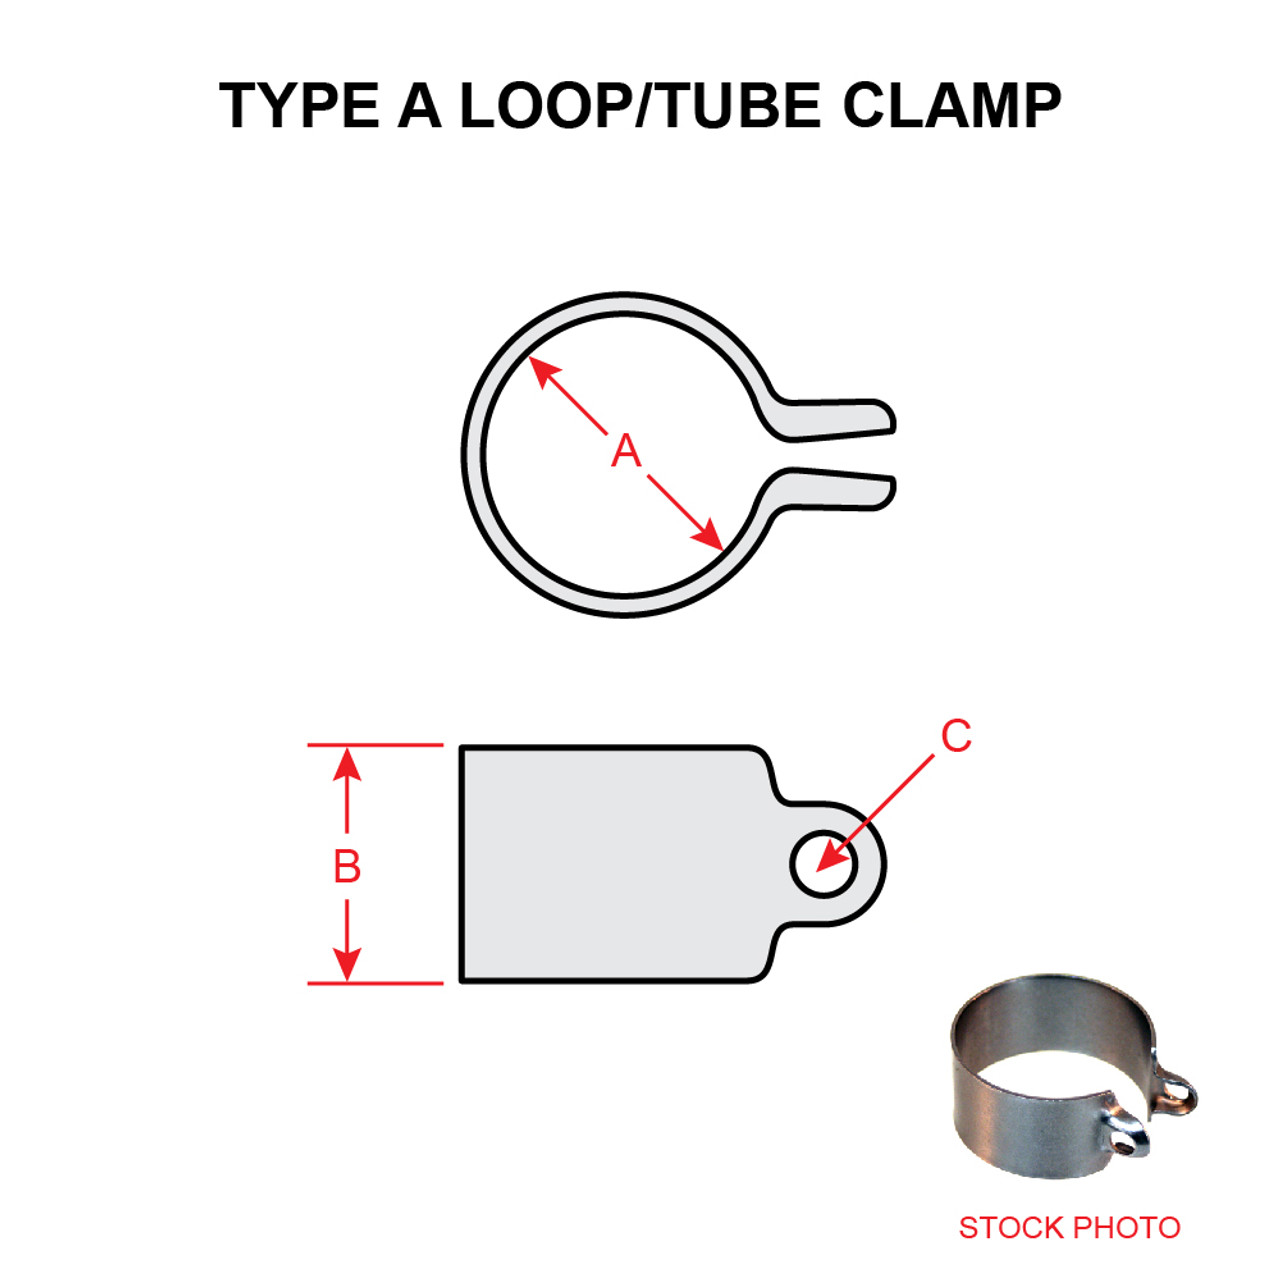 MS27405-12   LOOP CLAMP - TYPE A